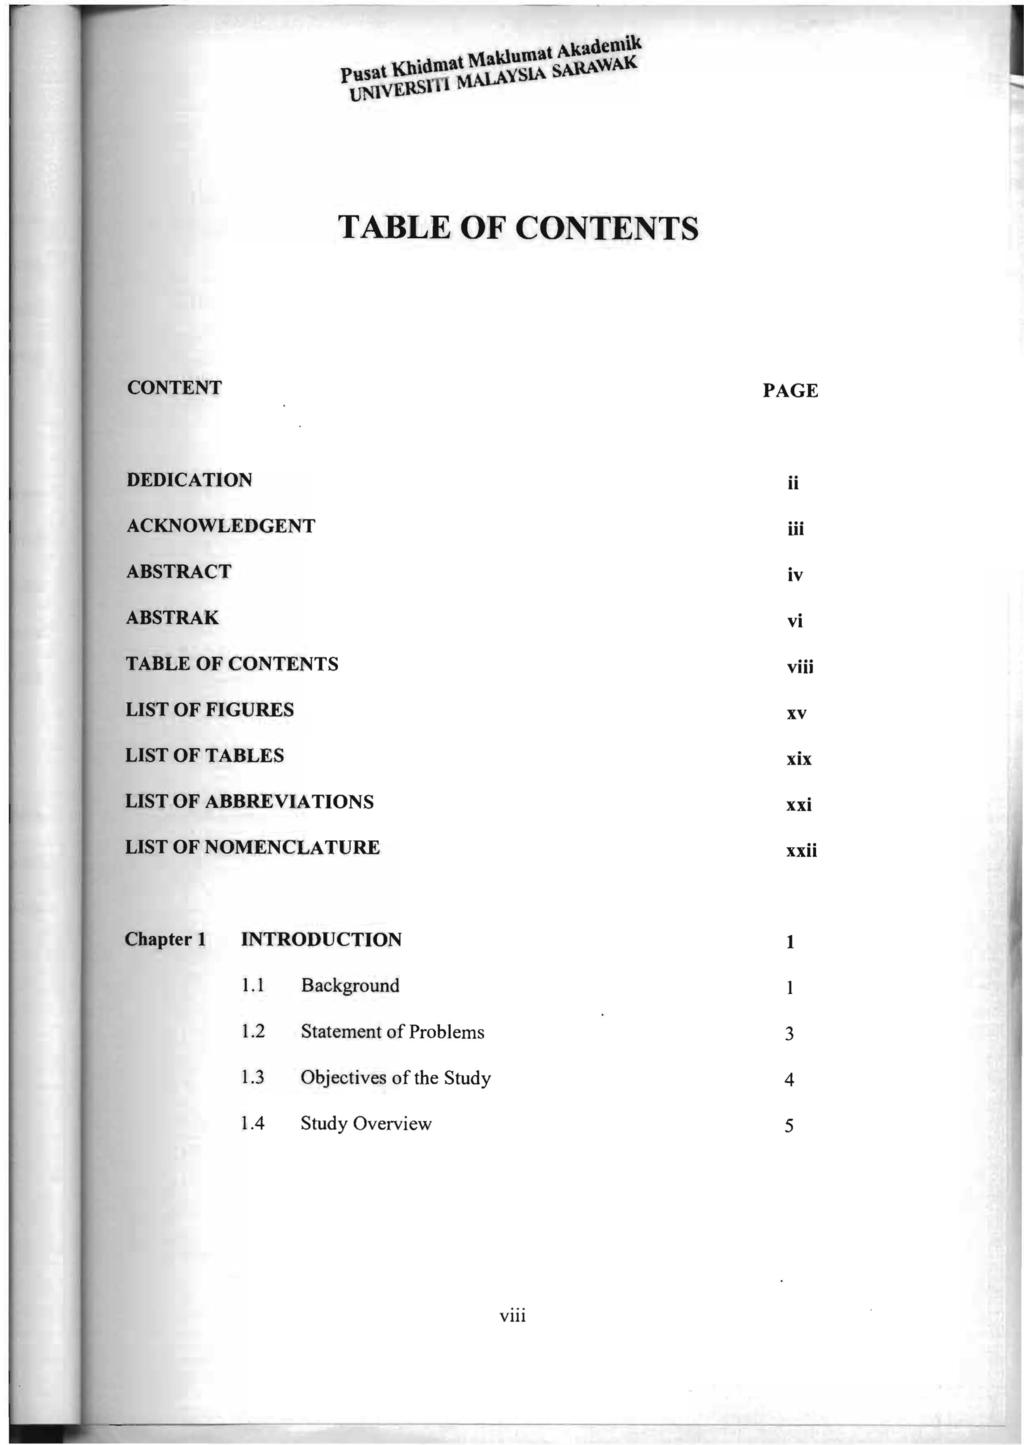 TABLE OF CONTENTS CONTENT PAGE DEDICATION ACKNOWLEDGE NT ABSTRACT ABSTRAK TABLE OF CONTENTS LIST OF FIGURES LIST OF TABLES LIST OF ABBREVIATIONS LIST OF